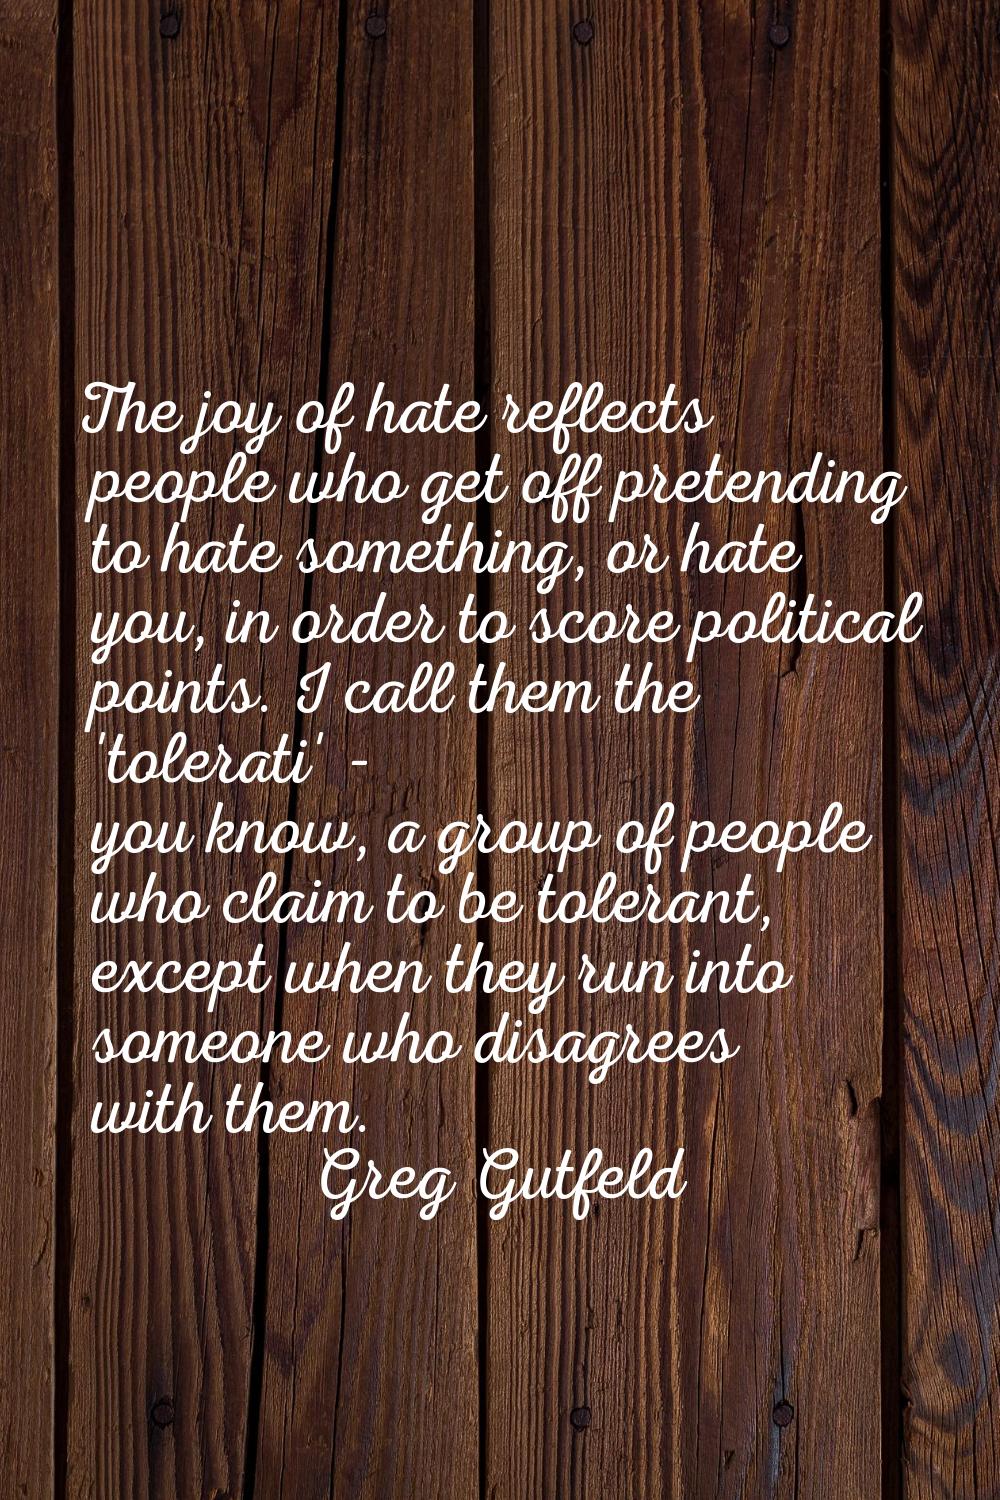 The joy of hate reflects people who get off pretending to hate something, or hate you, in order to 